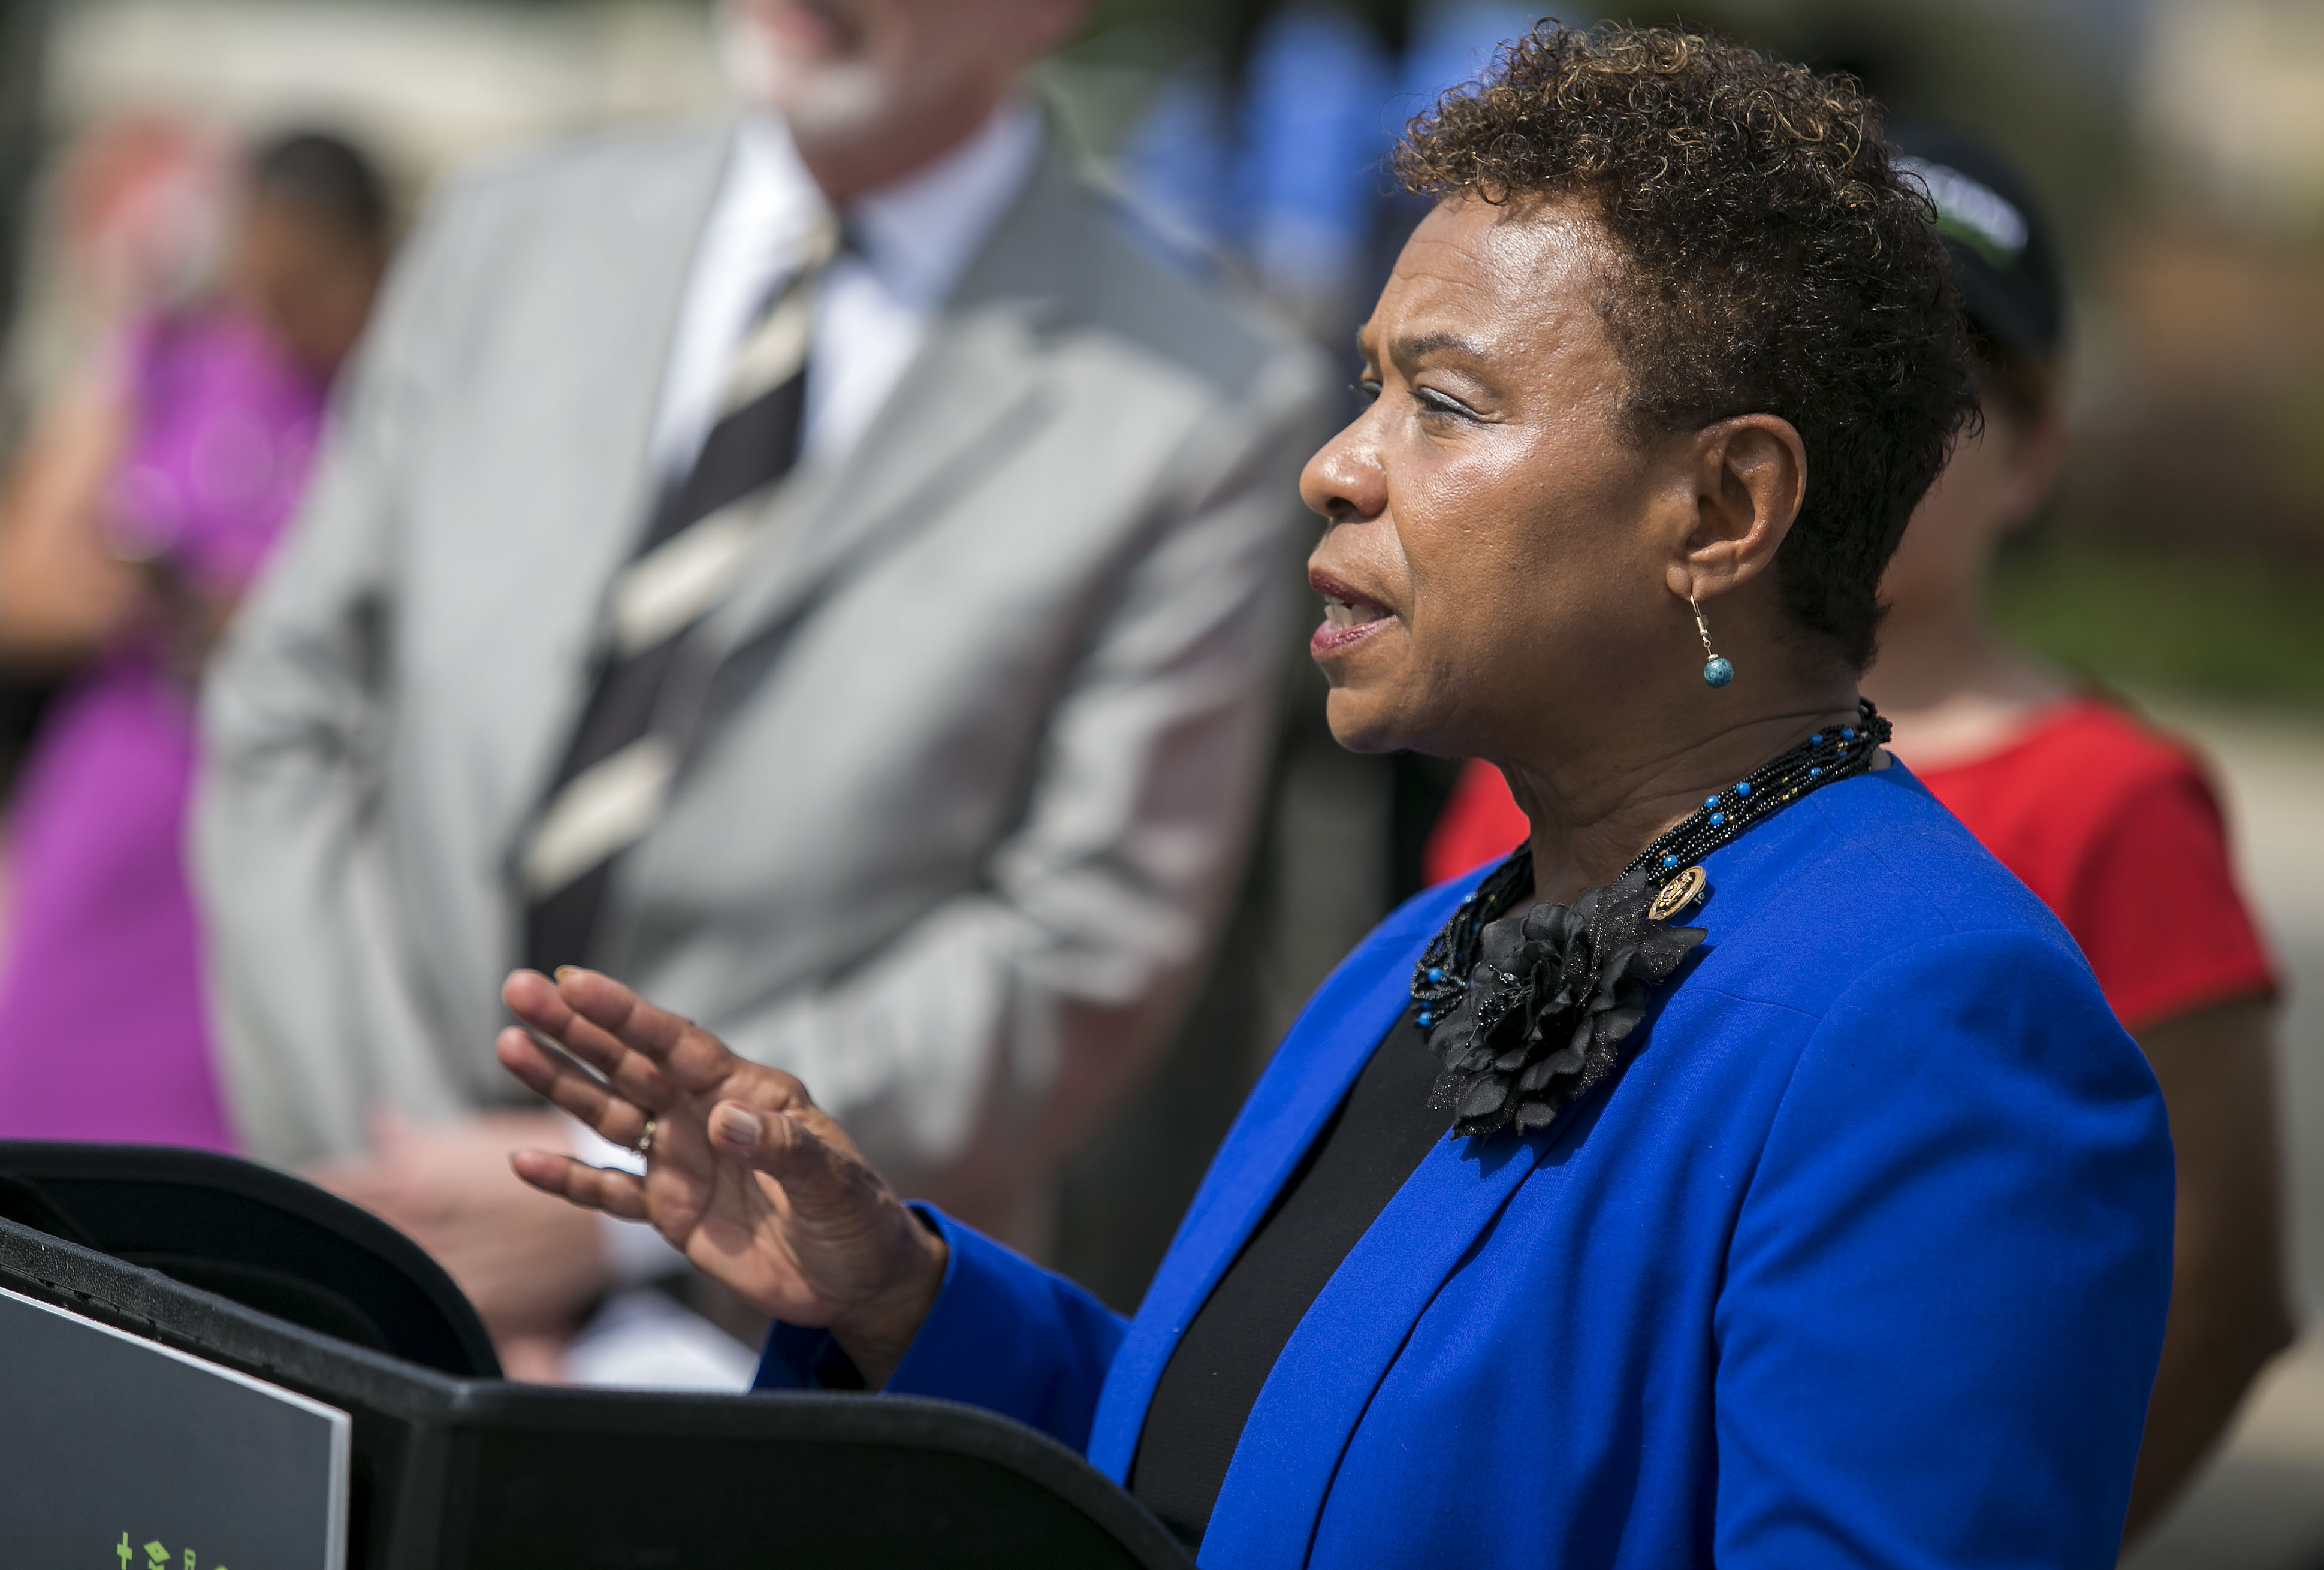 Rep. Barbara Lee, D-Calif., speaks during a news conference in Washington, Thursday, September 10, 2015. (Al Drago/CQ Roll Call)